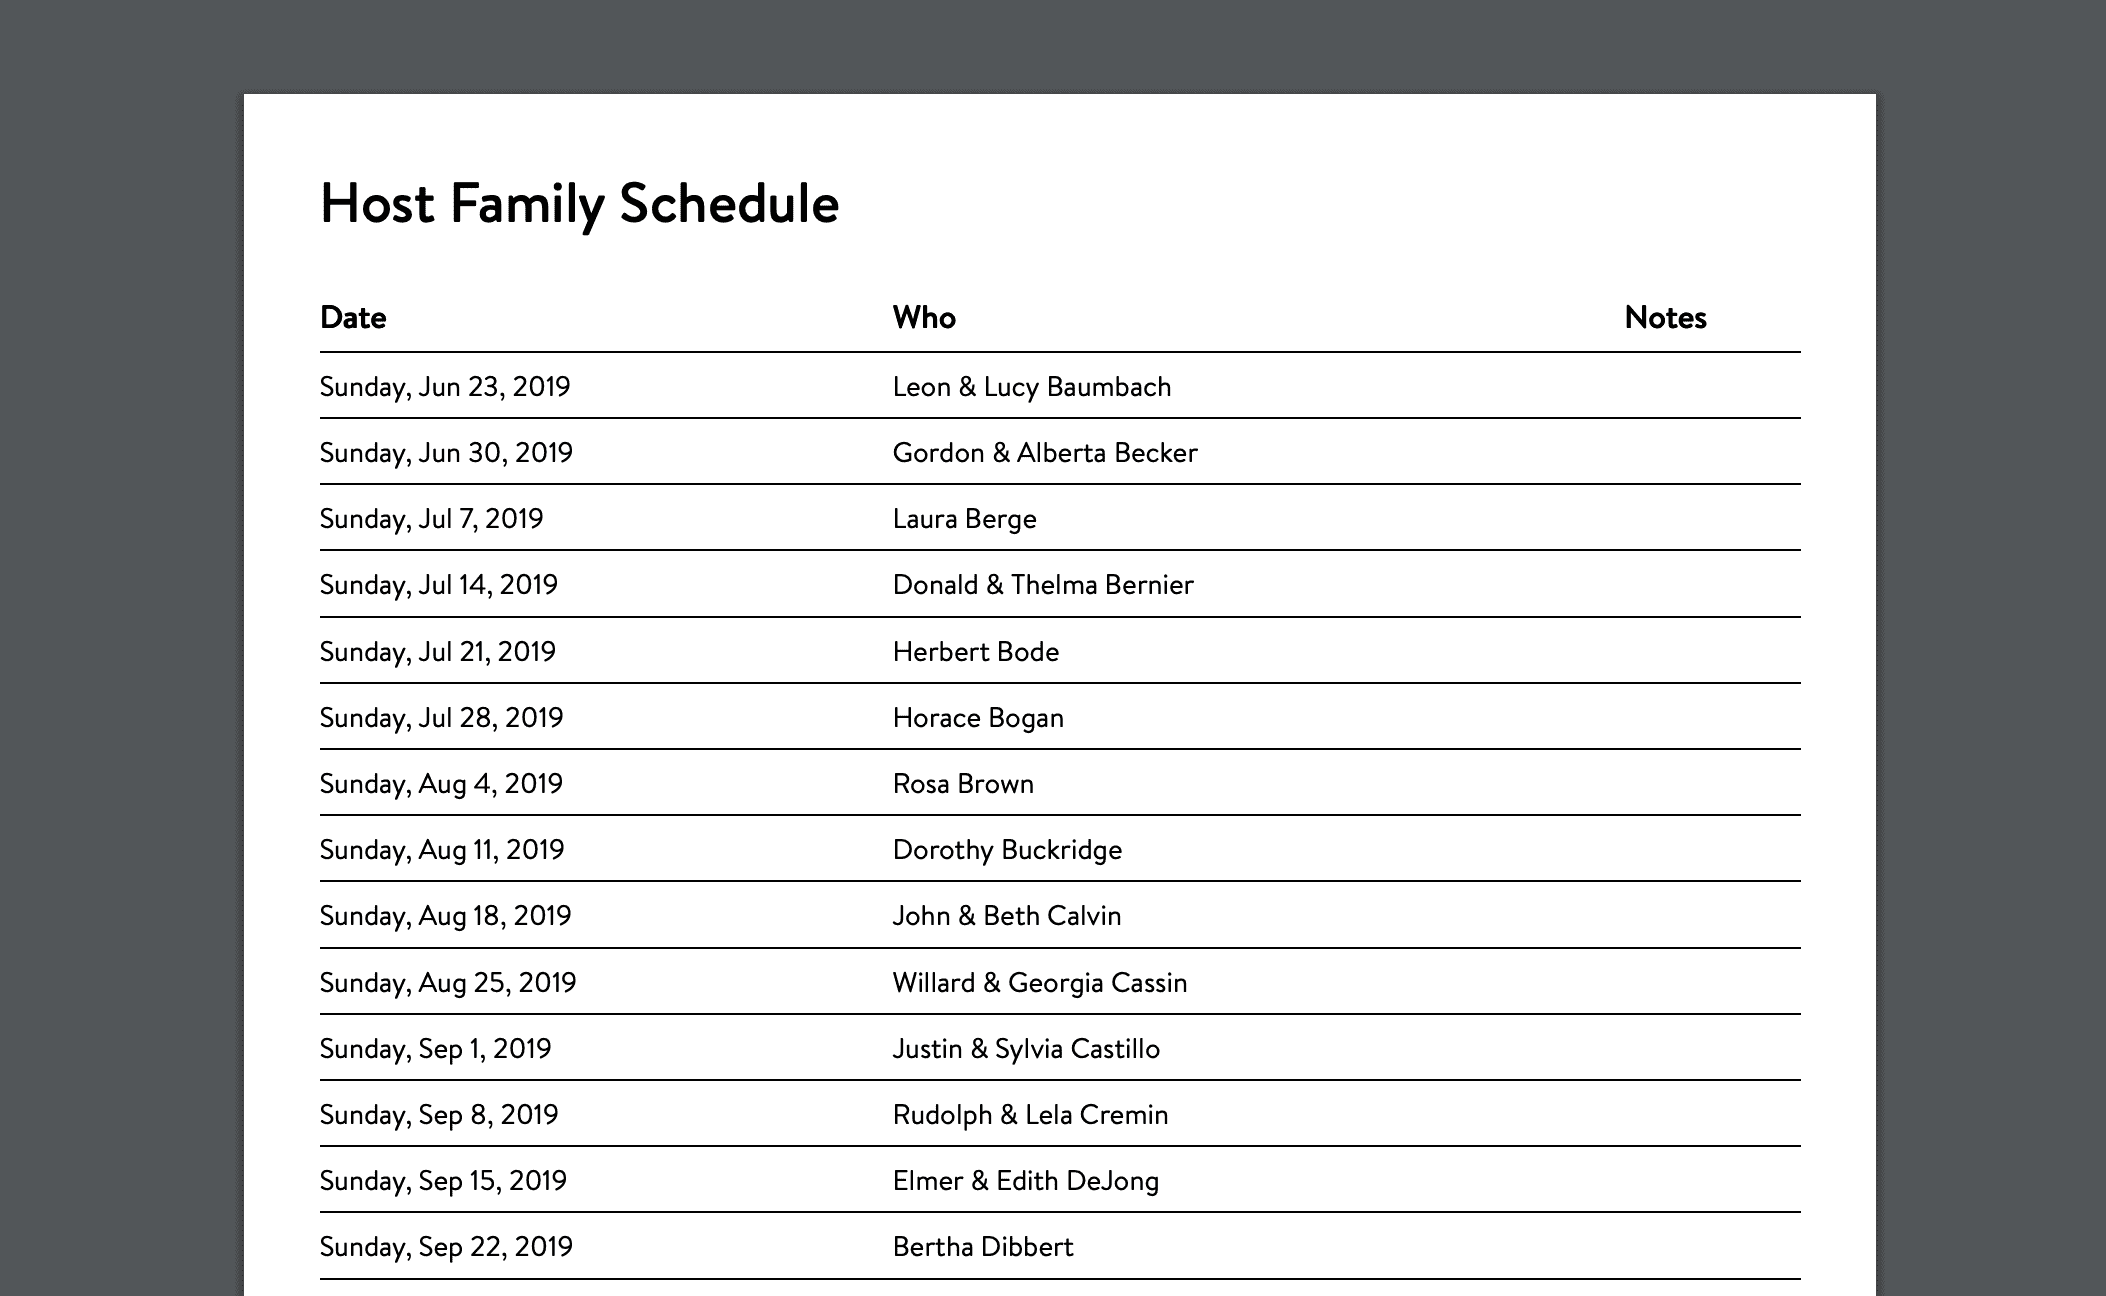 Screenshot of a printed host family schedule